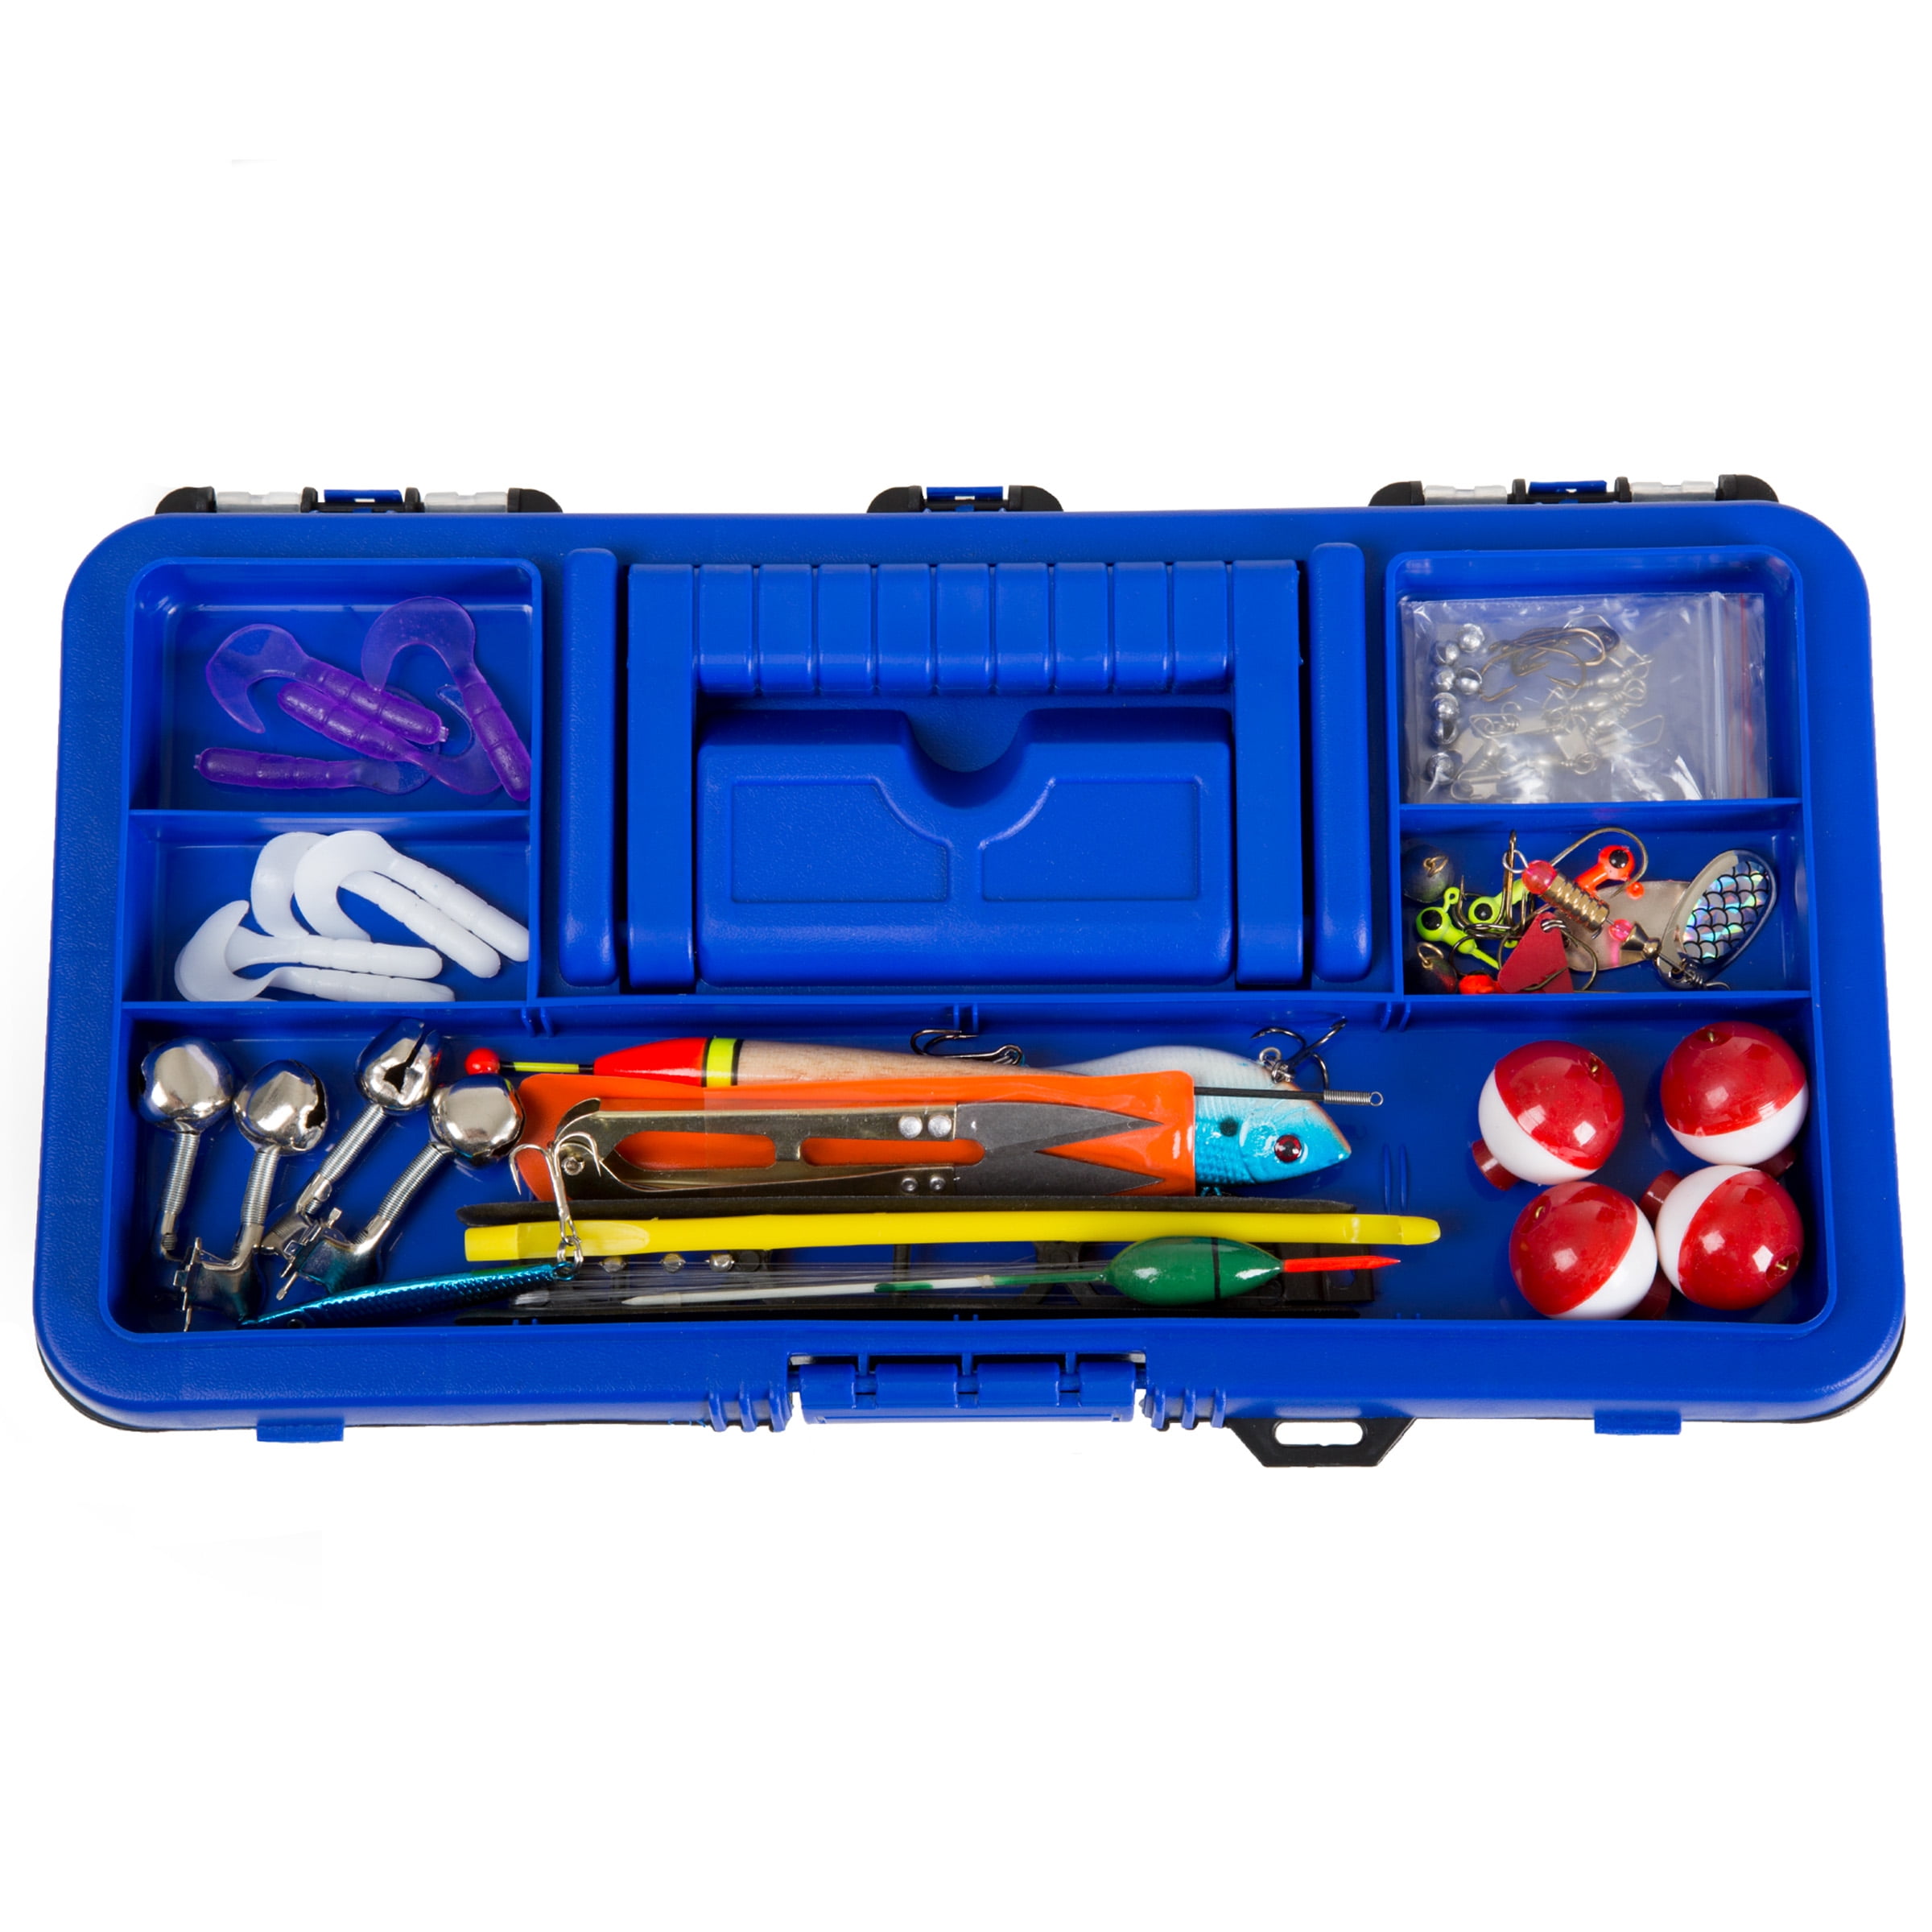 Fishing Single Tray Tackle Box- 55 Piece Tackle Gear Kit Includes Sinkers,  Hooks Lures Bobbers Swivels and Fishing Line by Wakeman Outdoors